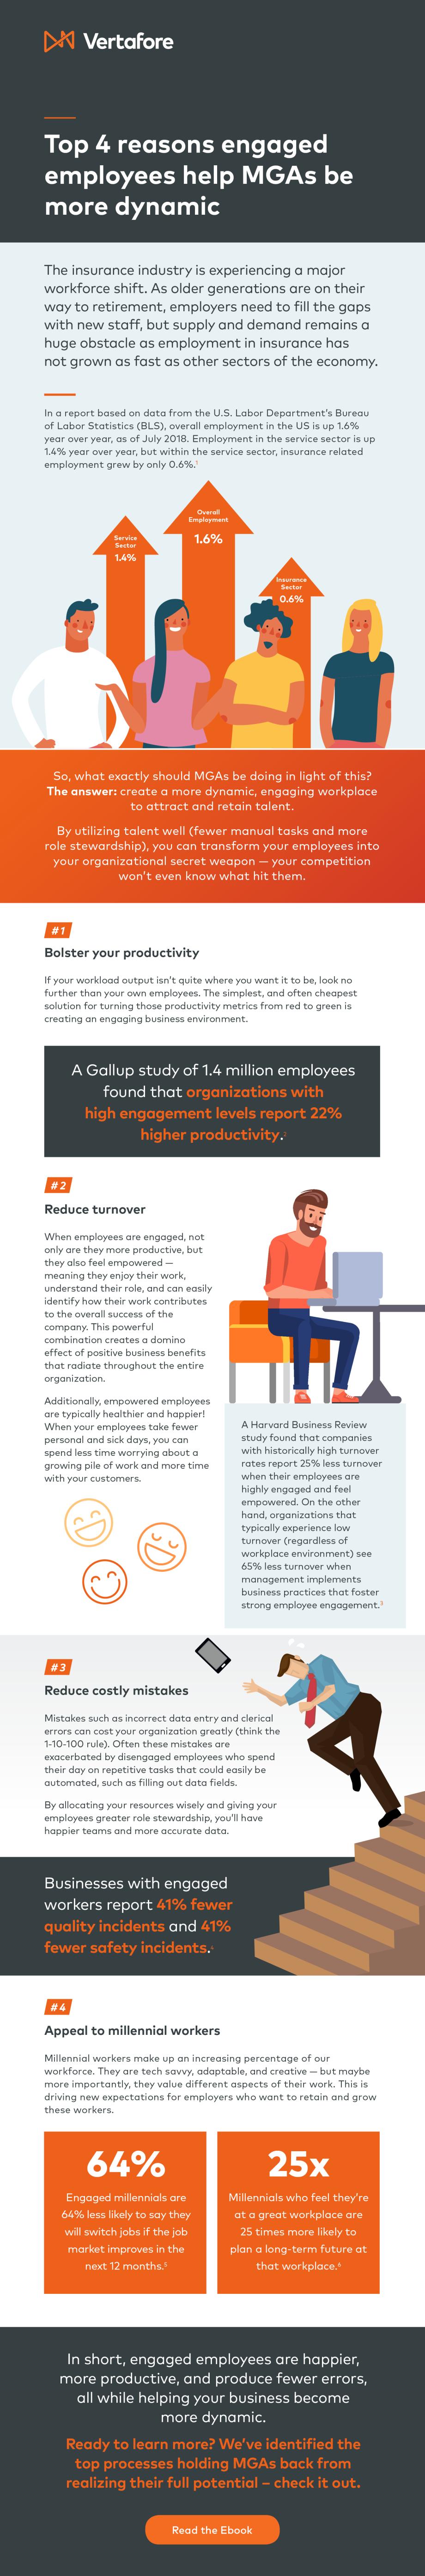 Top 4 reasons engaged employees help MGAs be more dynamic - infographic